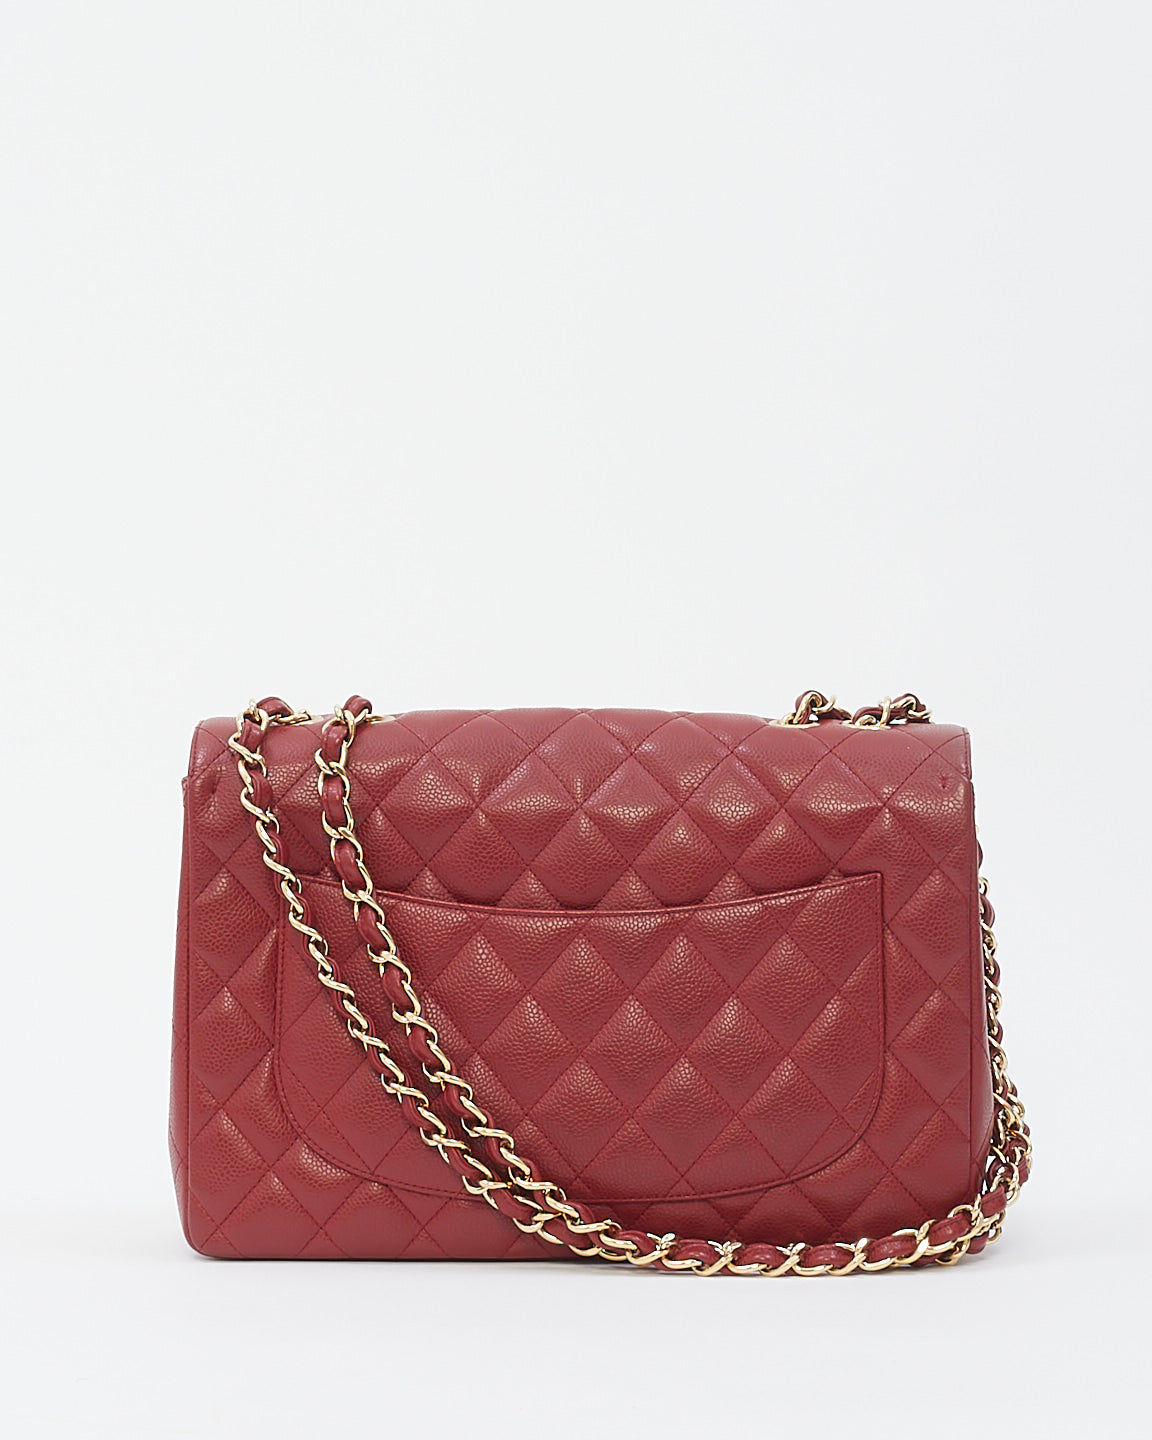 Chanel Burgundy Red Caviar Leather Jumbo Classic Flap with Gold Hardware